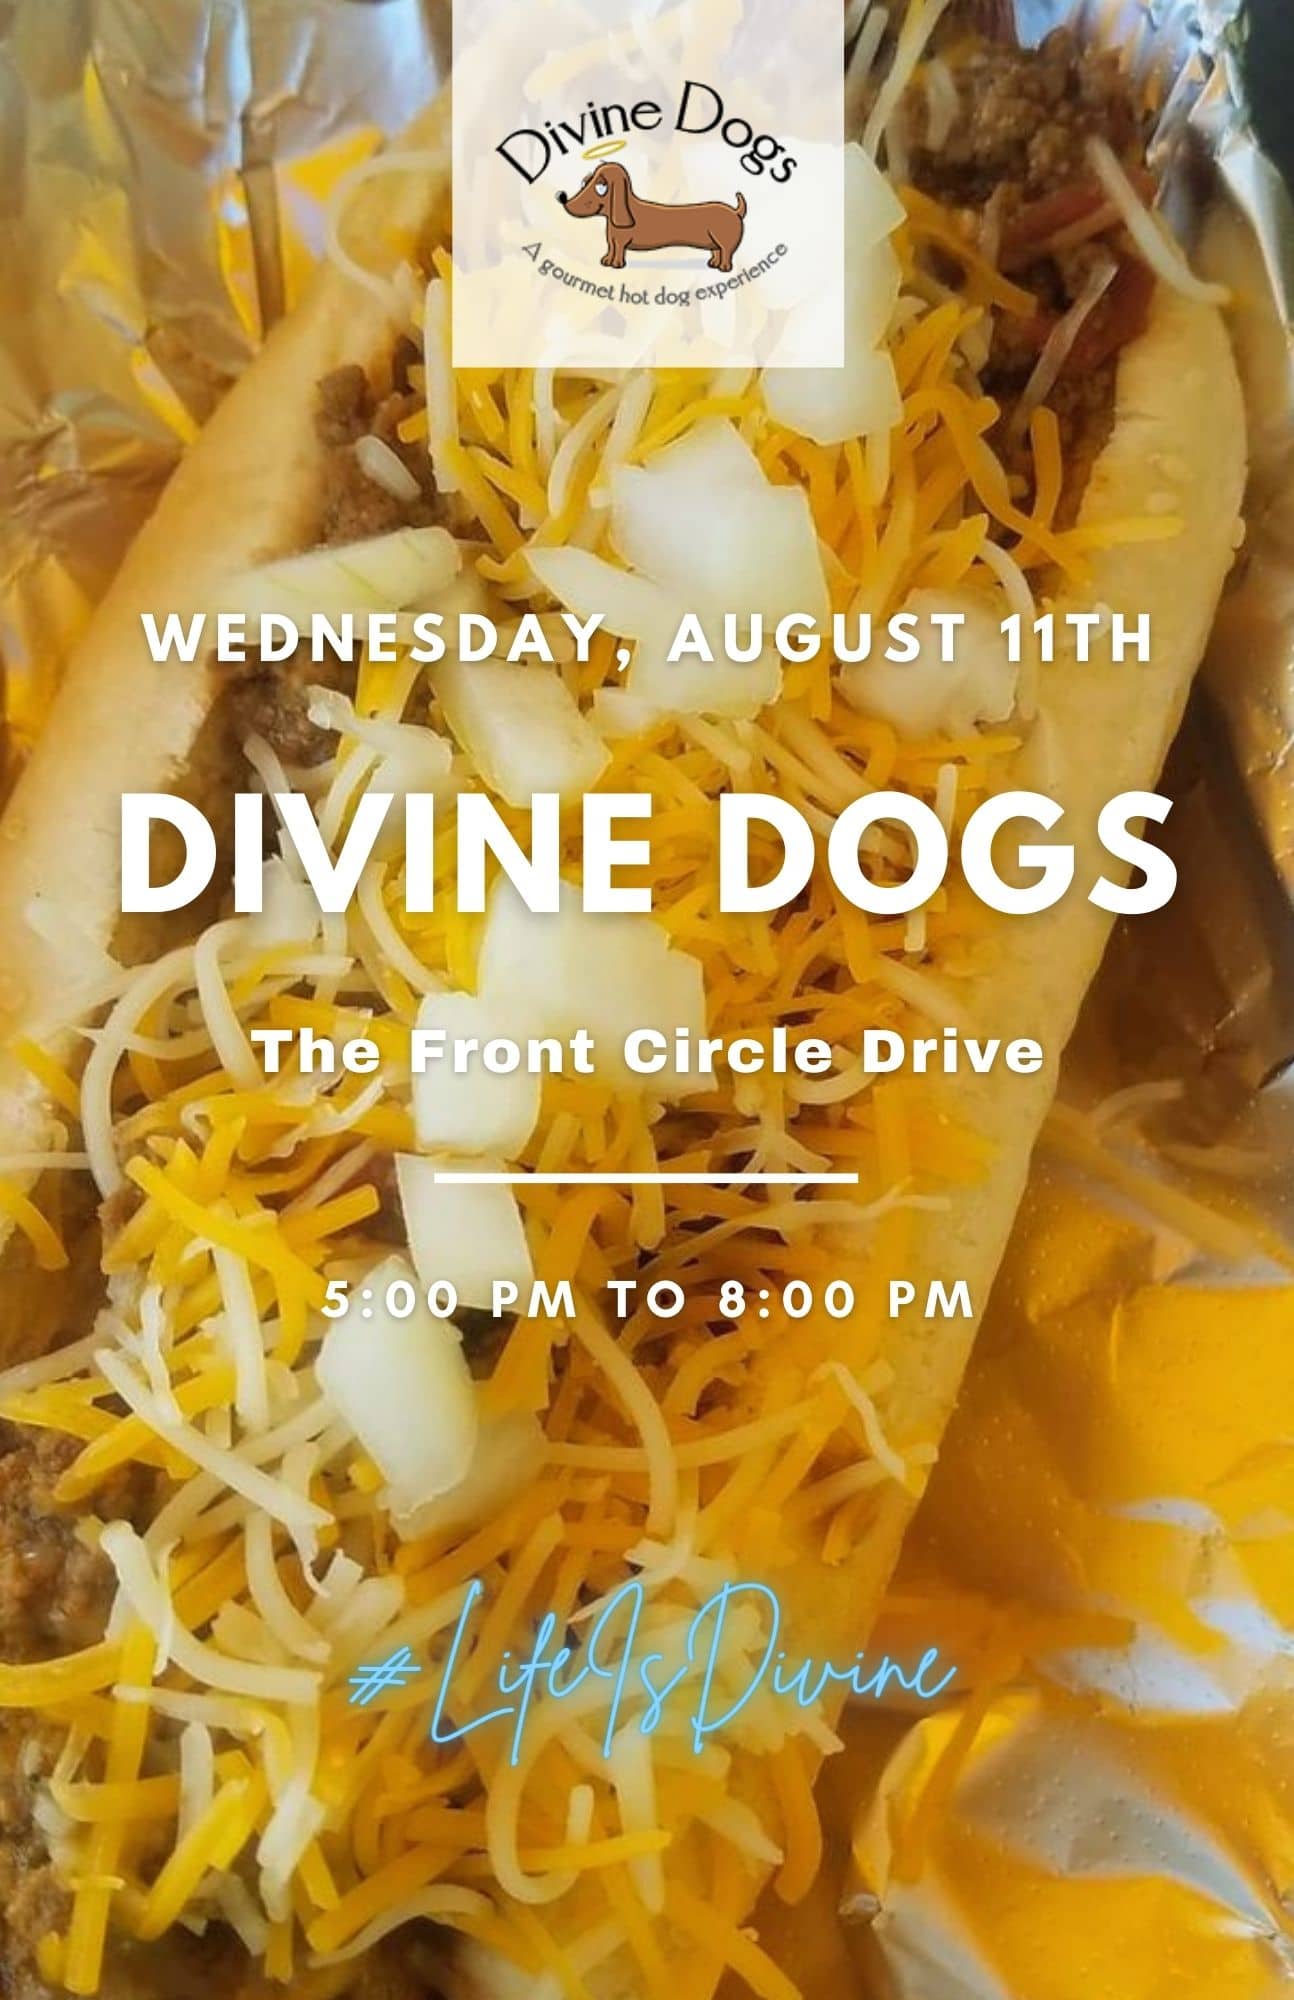 Divine dogs the front circle drive in Apartments in The Woodlands TX.